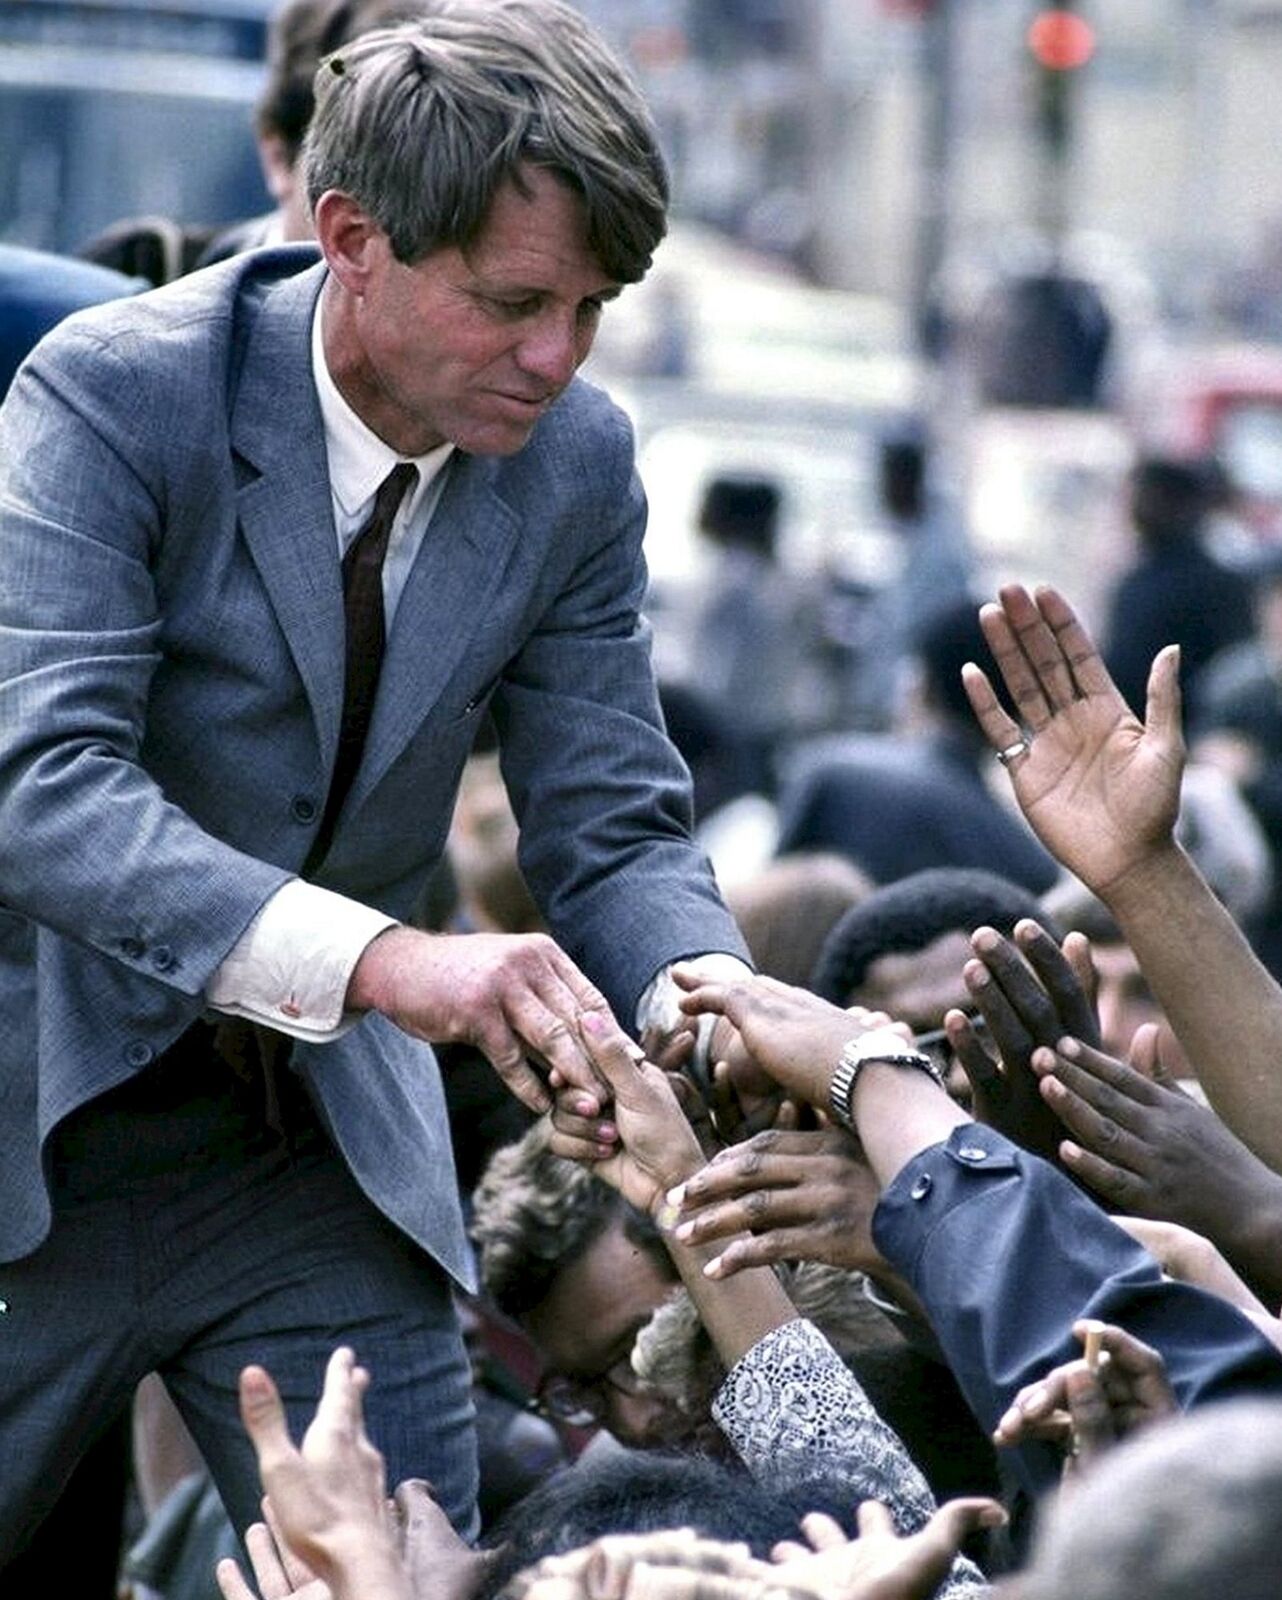 1968 ROBERT F KENNEDY ON THE CAMPAIGN TRAIL Photo (220-V)